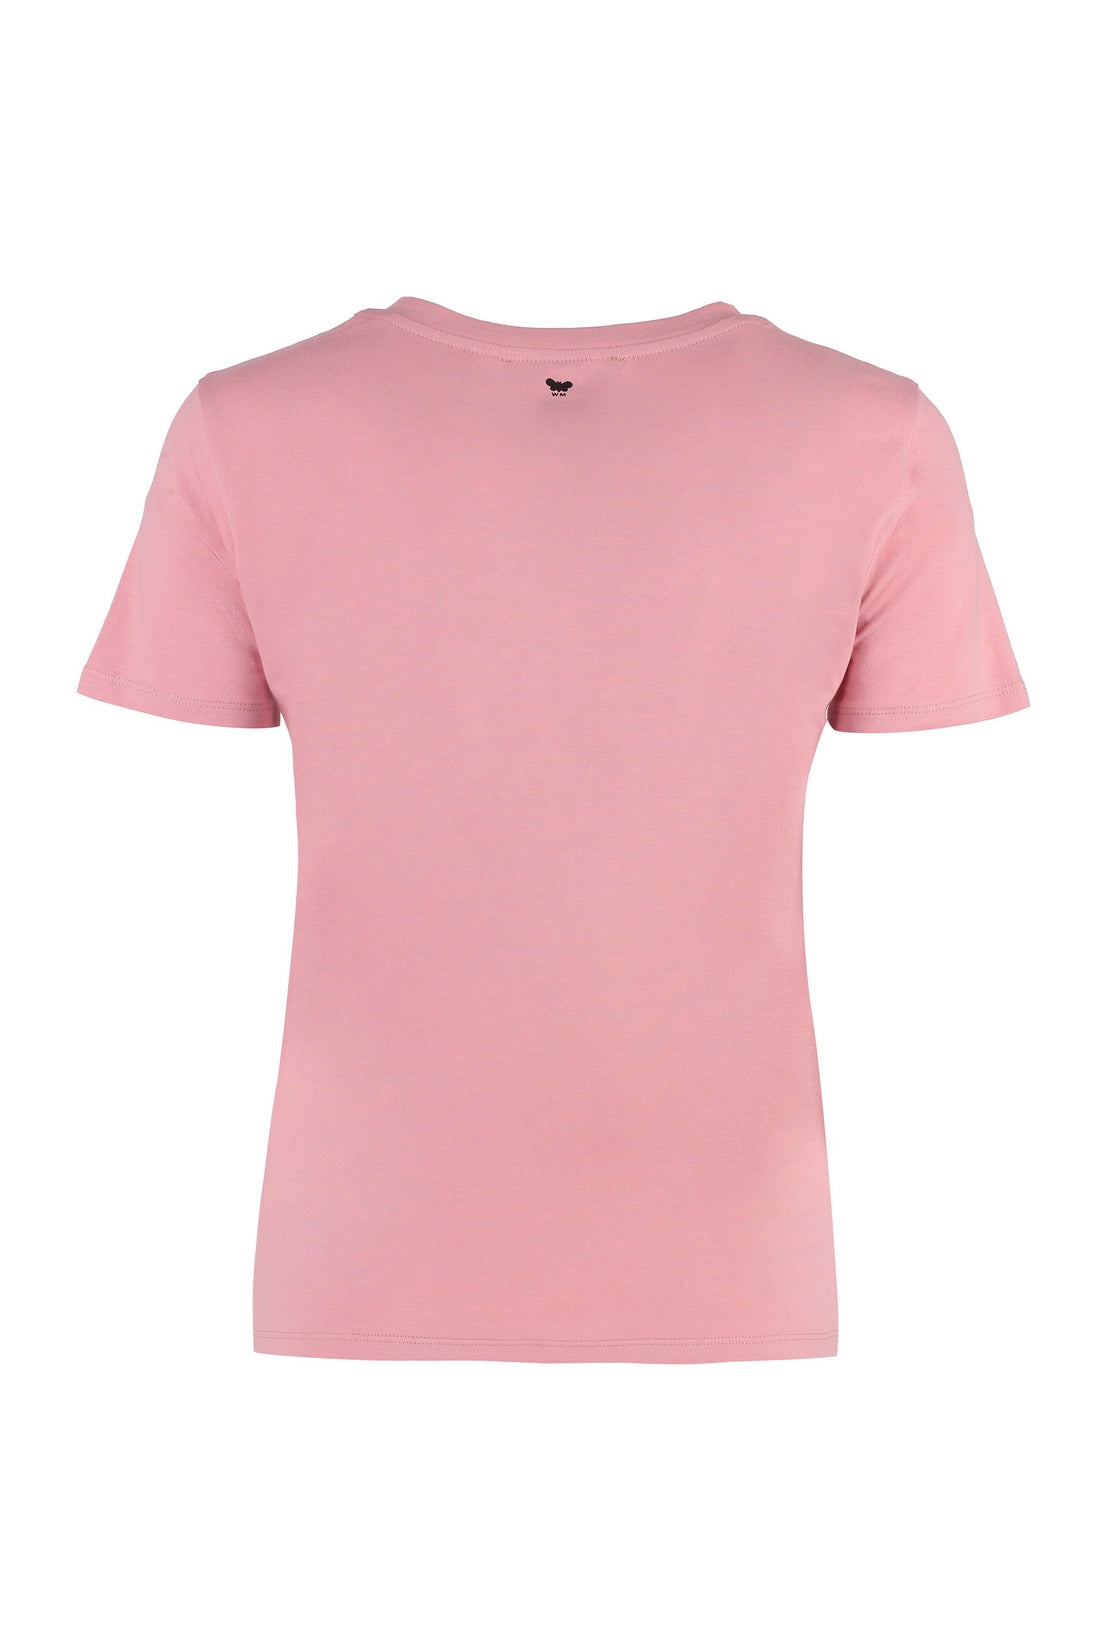 Weekend Max Mara-OUTLET-SALE-Chopin printed cotton T-shirt-ARCHIVIST